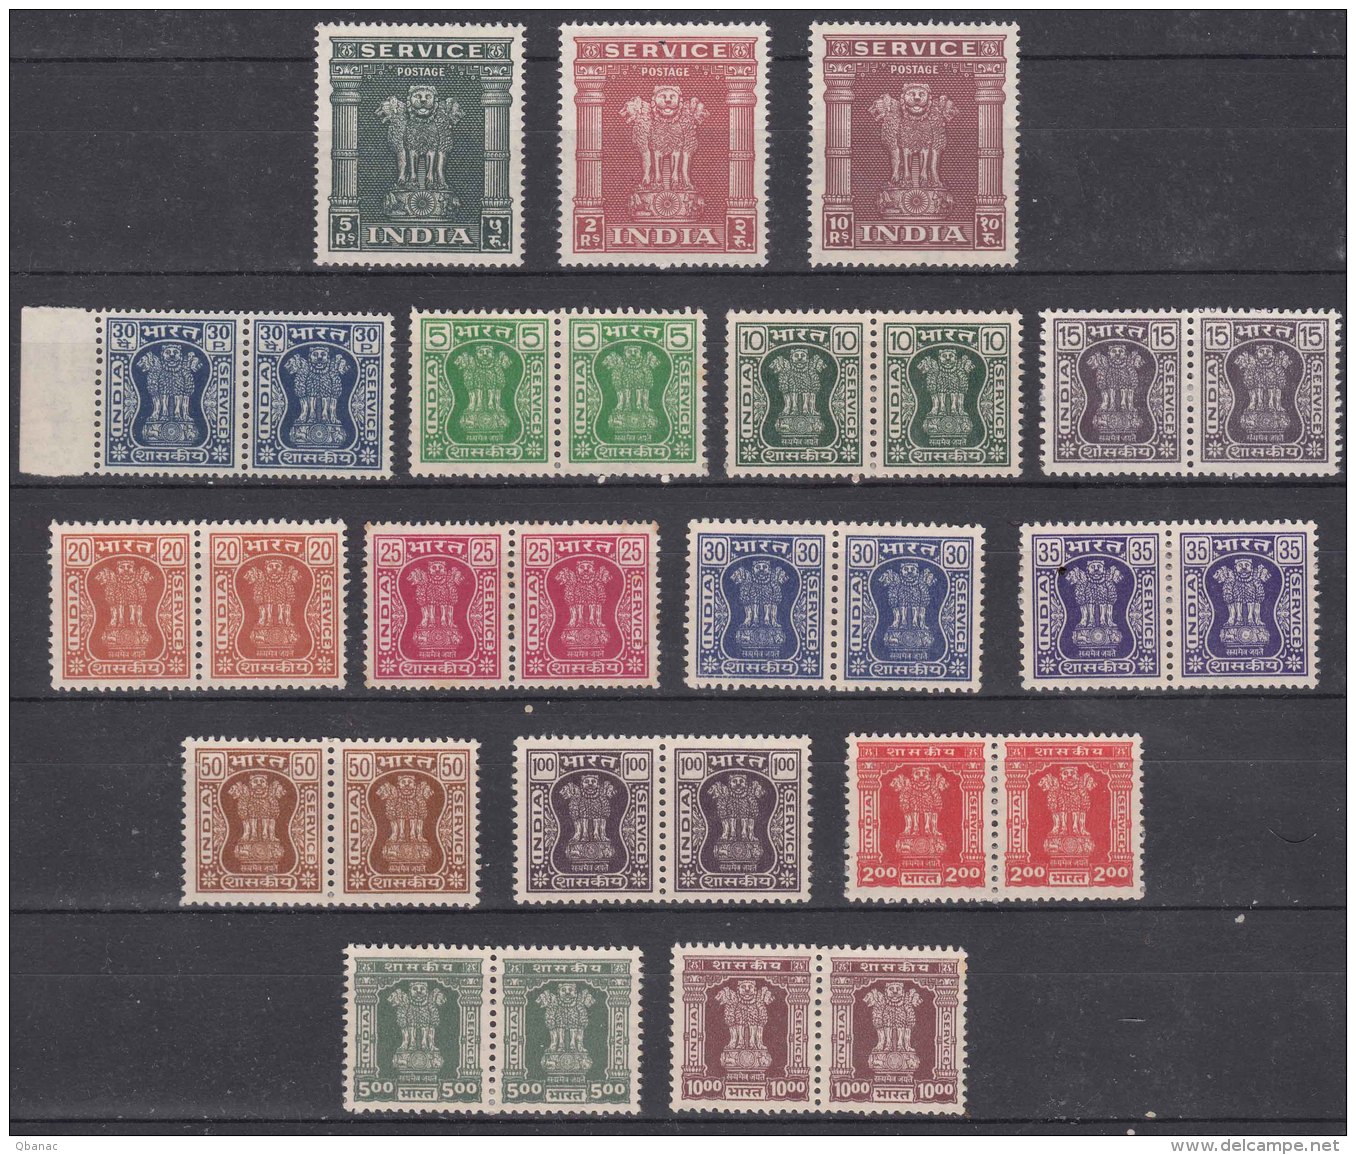 India Porto Postage Due, Dienstmarken Lot, Mixed Mint Never Hinged With Gum Or Without Gum - Dienstzegels